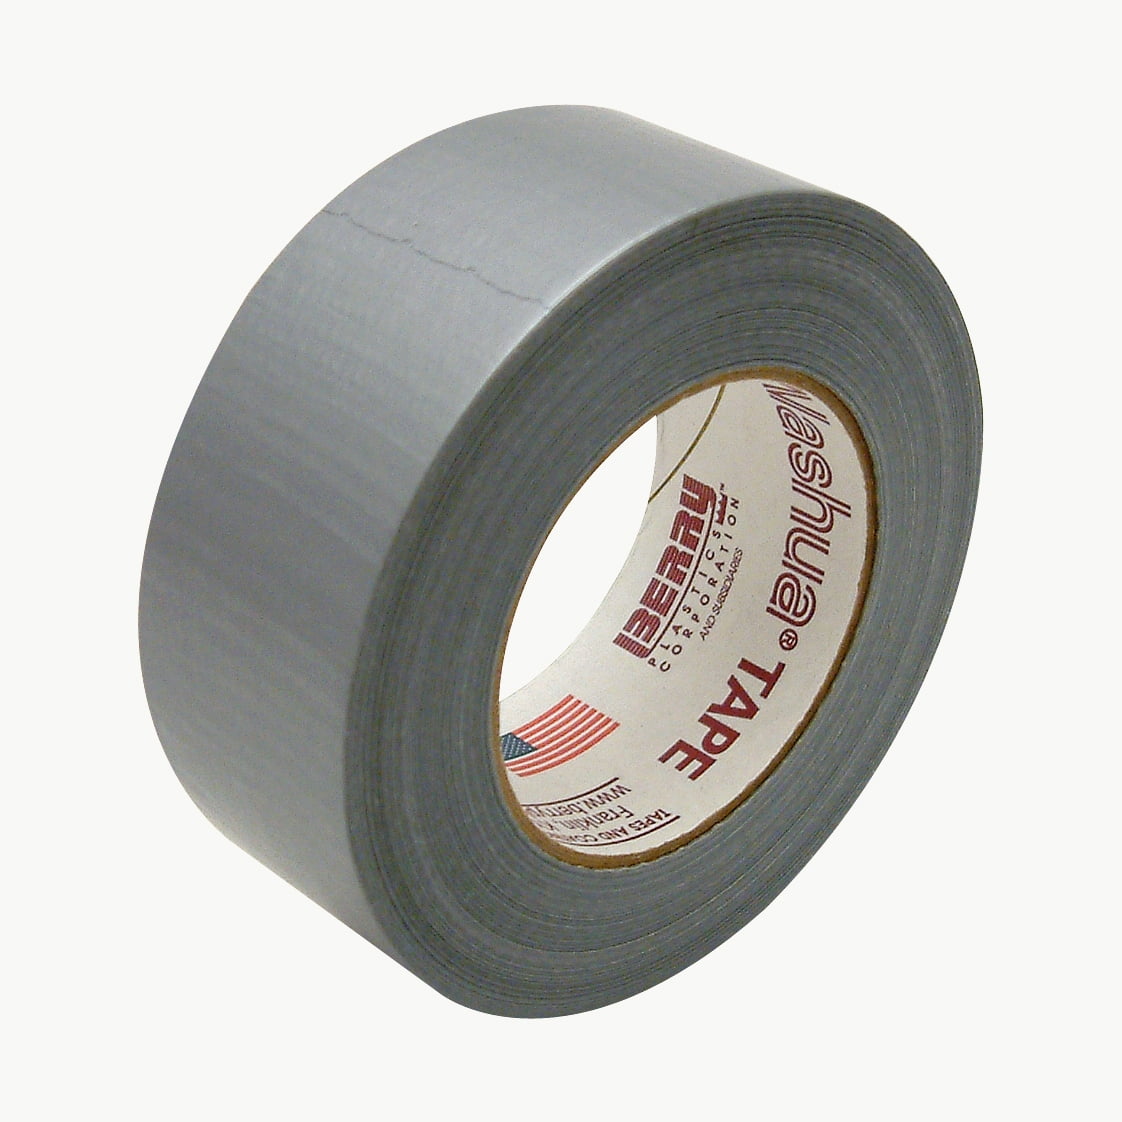 2 Rolls Silver Duct Tape 1/2" x 60 yd Utility Grade Duct Tape Free Shipping 